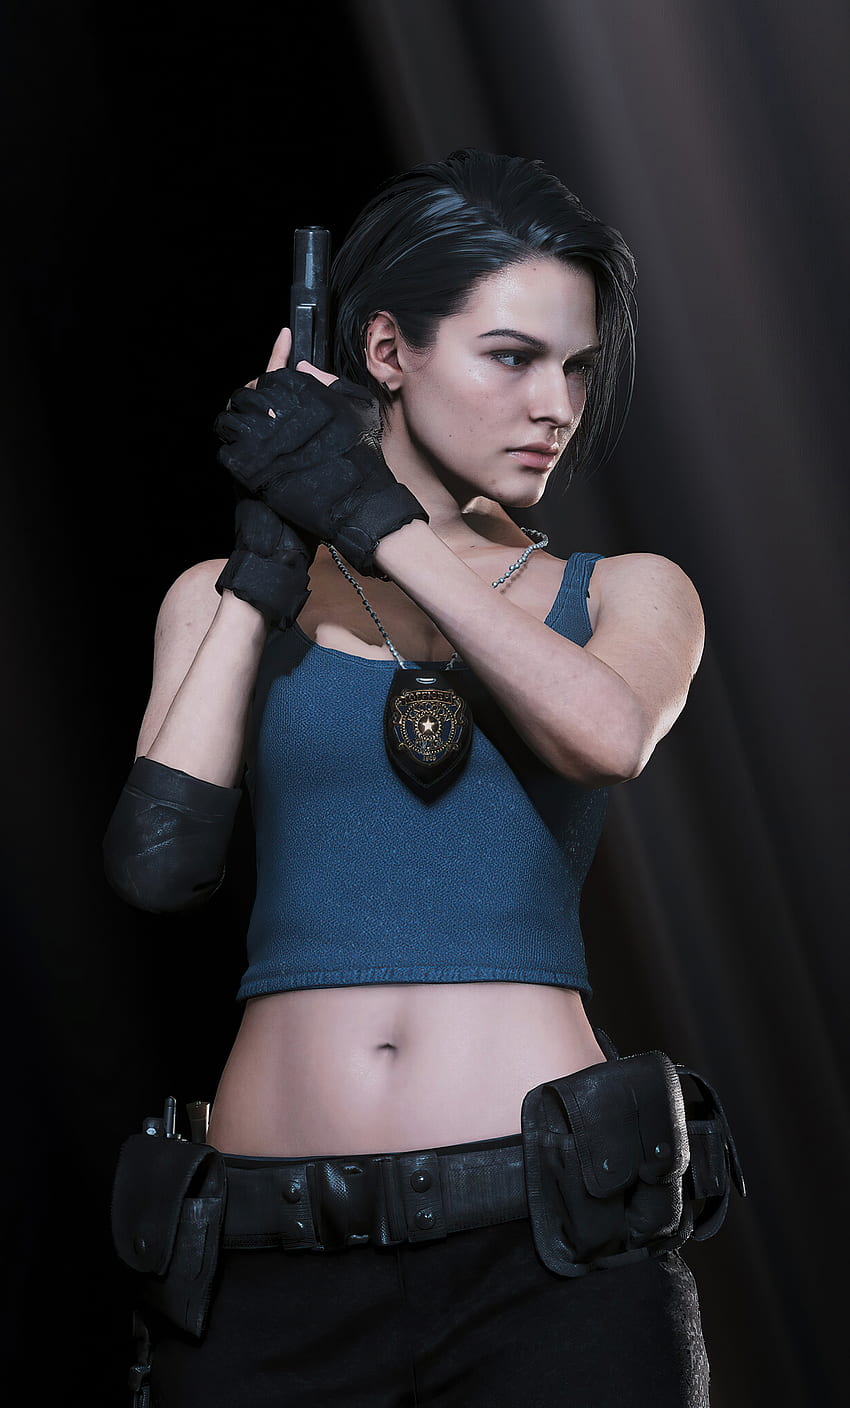 Jill Valentine In Resident Evil 3 Remake Iphone Background And Resident Evil 3 Phone Hd